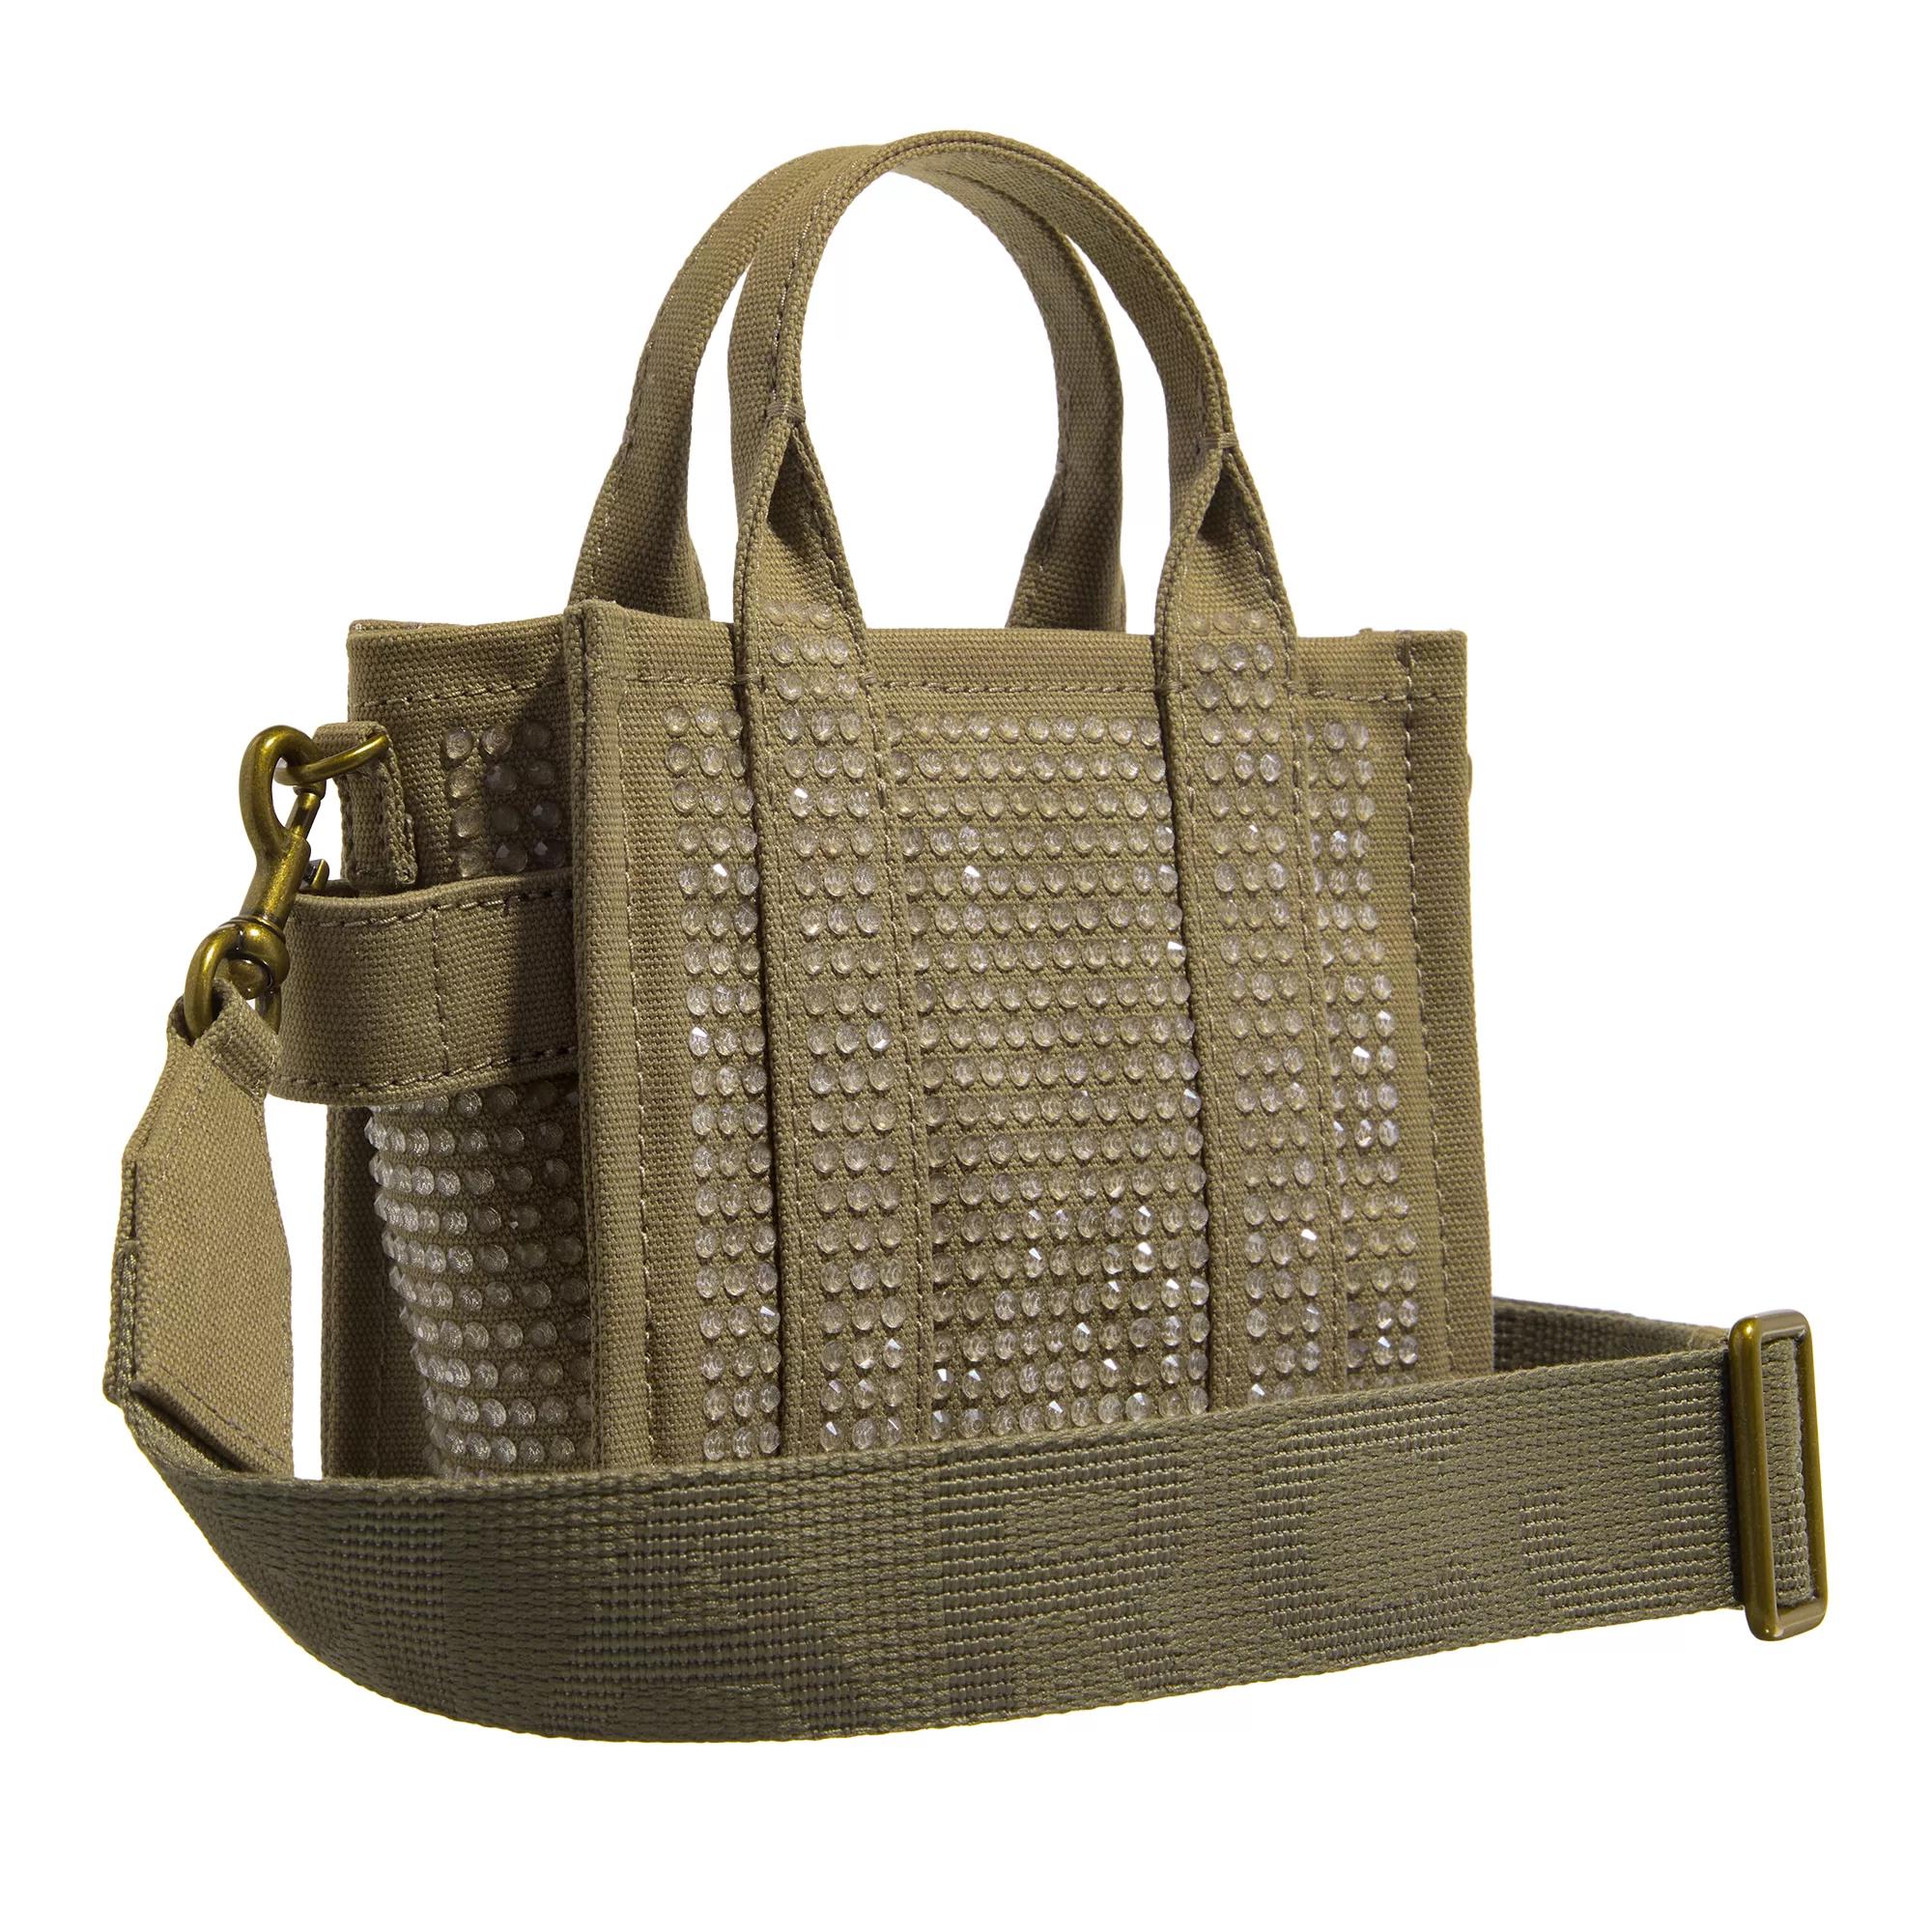 Marc Jacobs Totes The Mini Crystal Canvas Tote Bag in groen